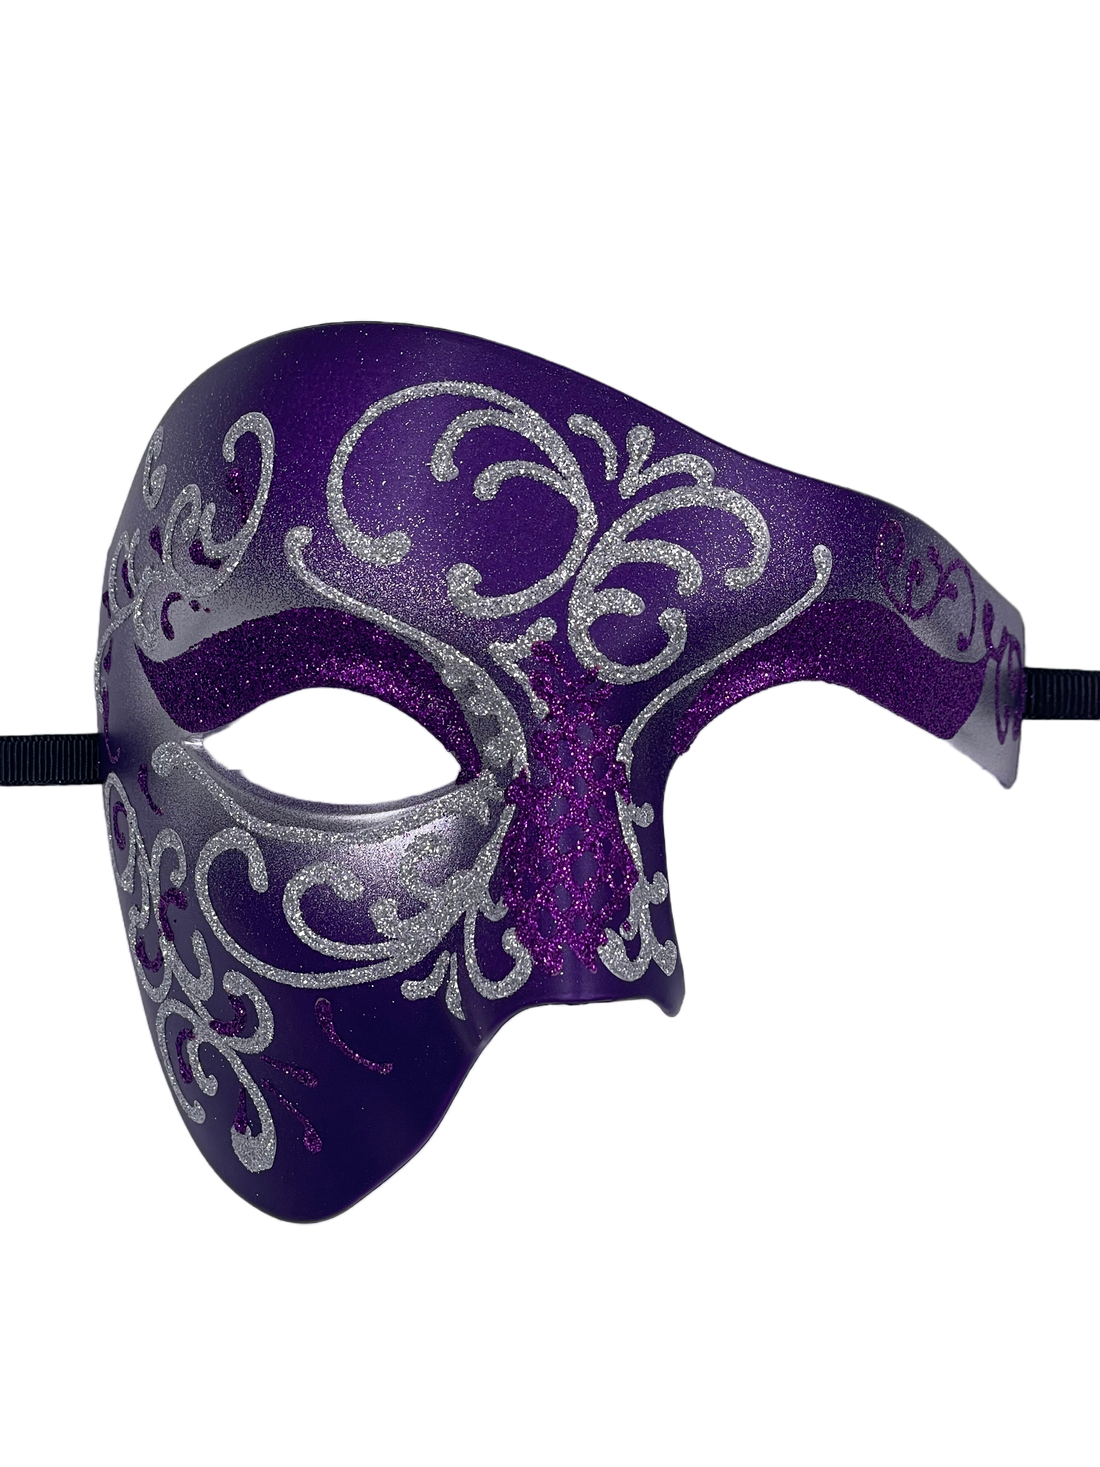 Mystique Unveiled: Purple and Silver Elegance in Our Latest Men’s Masquerade Offering